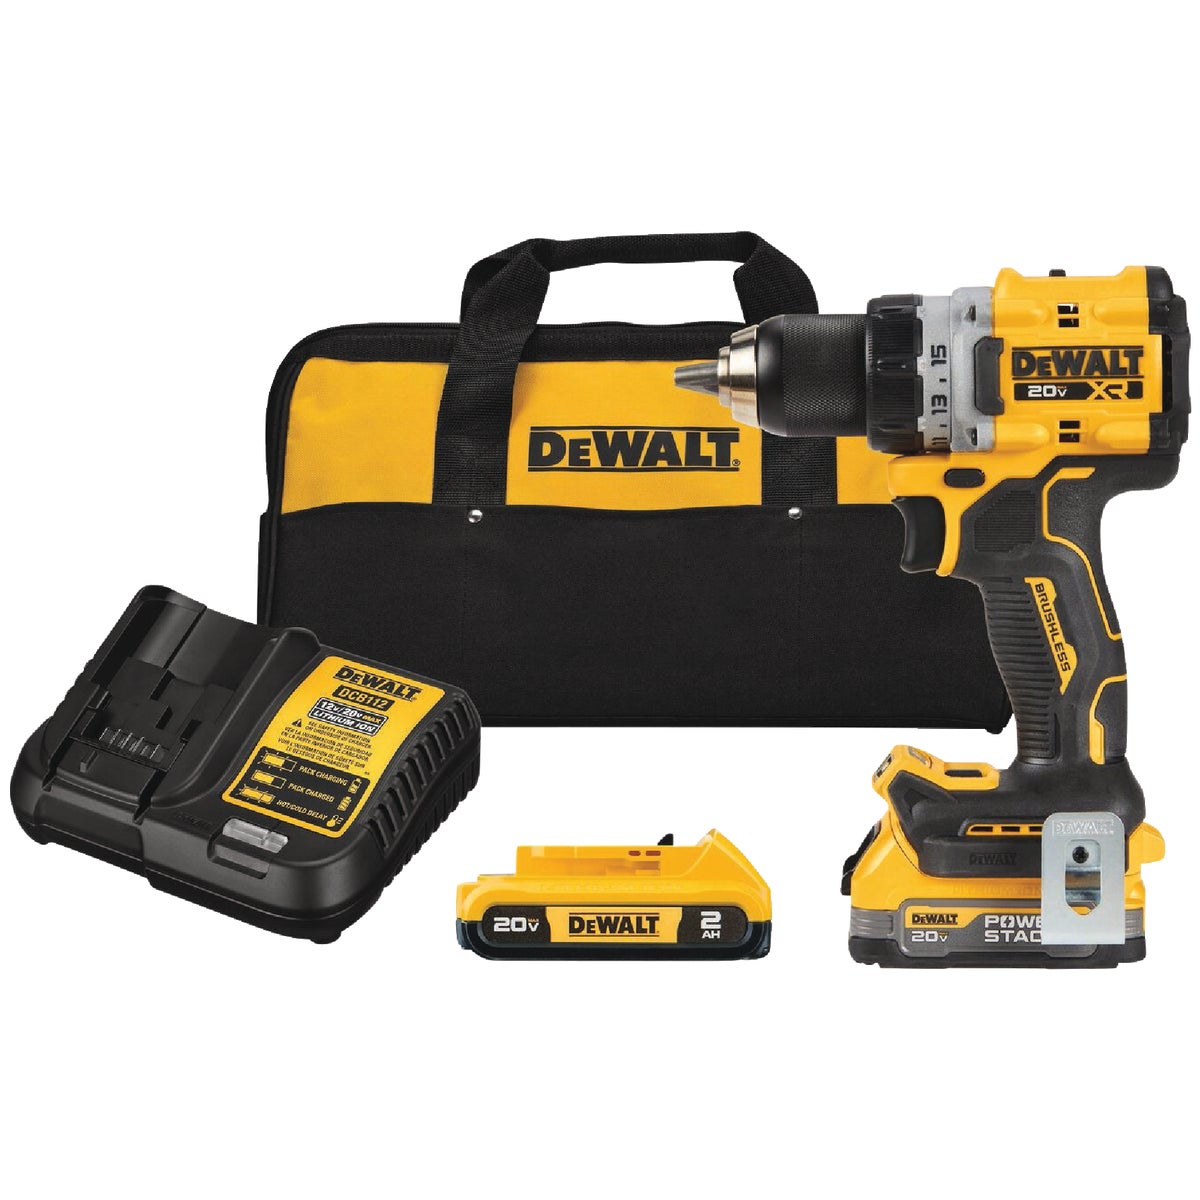 DEWALT 20V MAX XR Brushless 1/2 In. Compact Drill/Driver Kit with POWERSTACK Battery